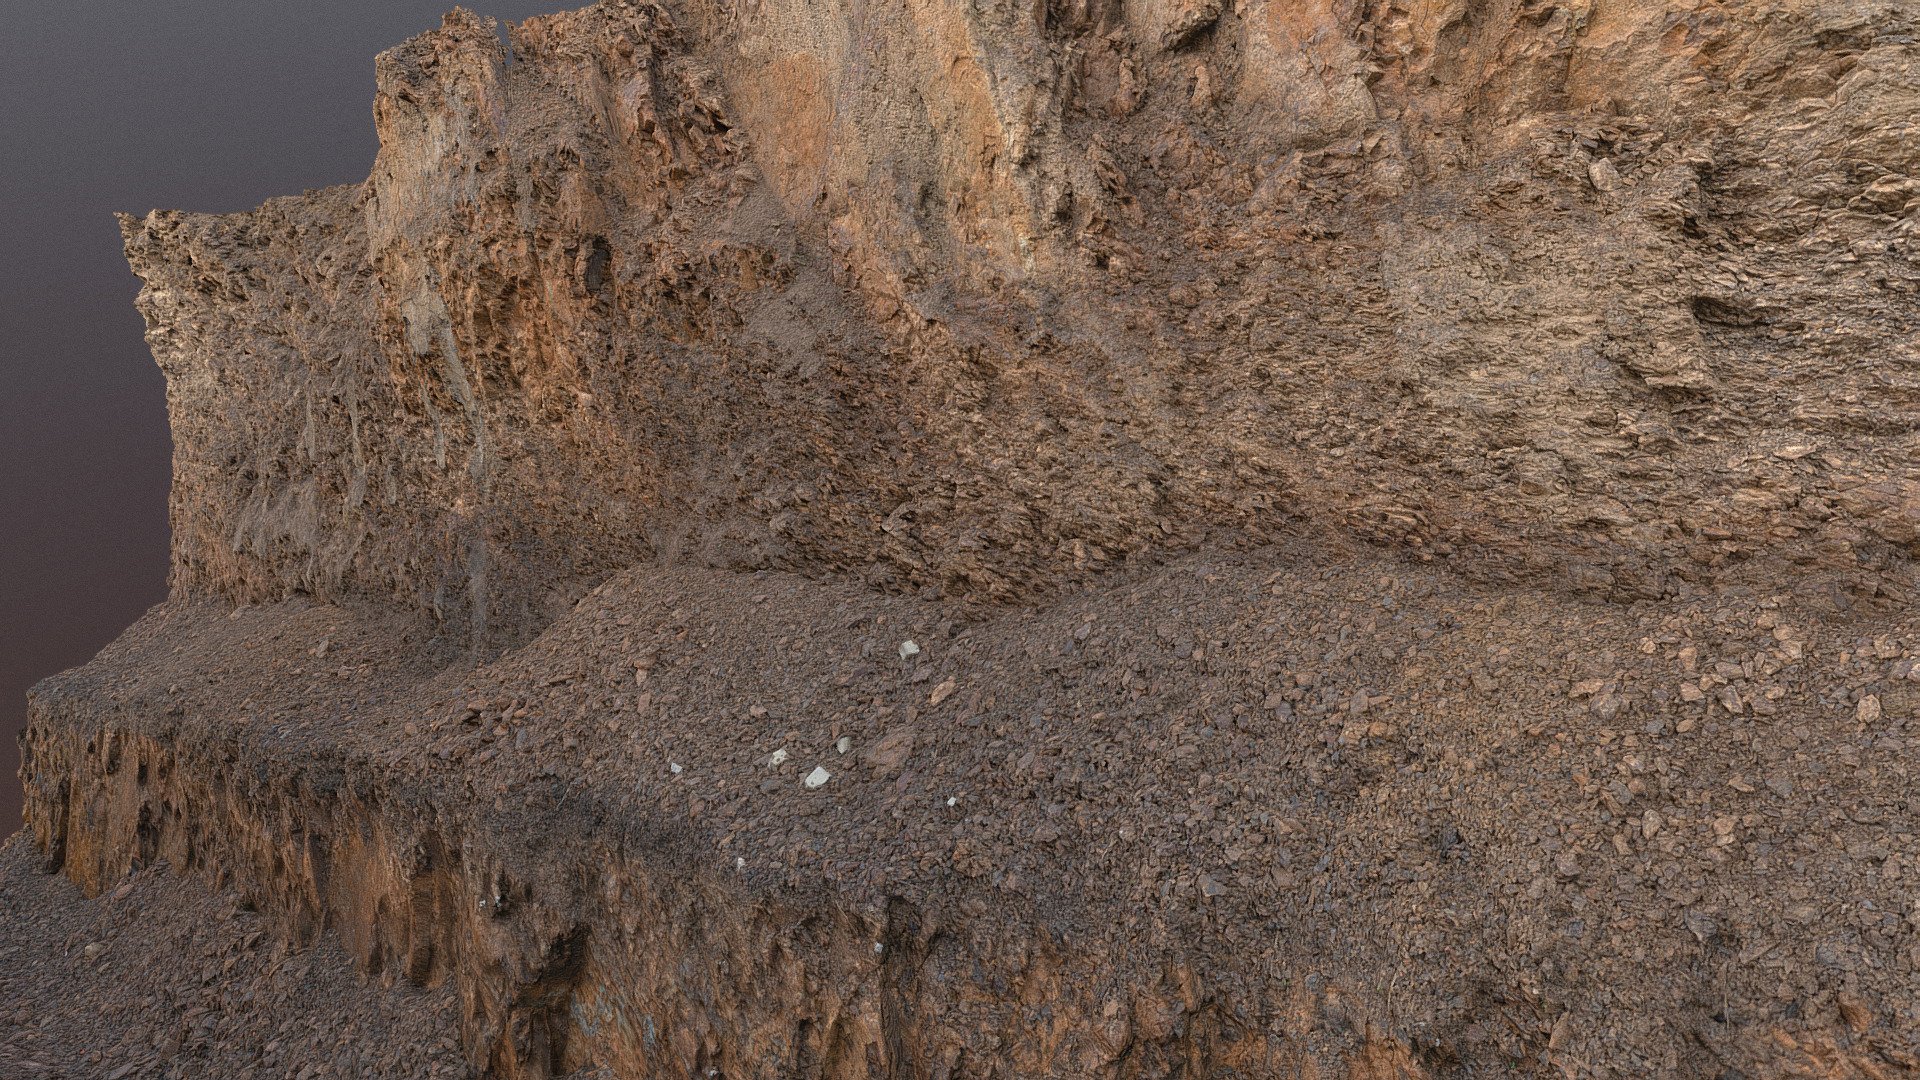 Construction dig site excavation building ground earth work, dug-out  trench ditch in rock cliff wall

photogrammetry scan (320x24mp), 3x16k textures + hd normals  (as additional .zip download) - Excavated cliff face - Buy Royalty Free 3D model by matousekfoto 3d model